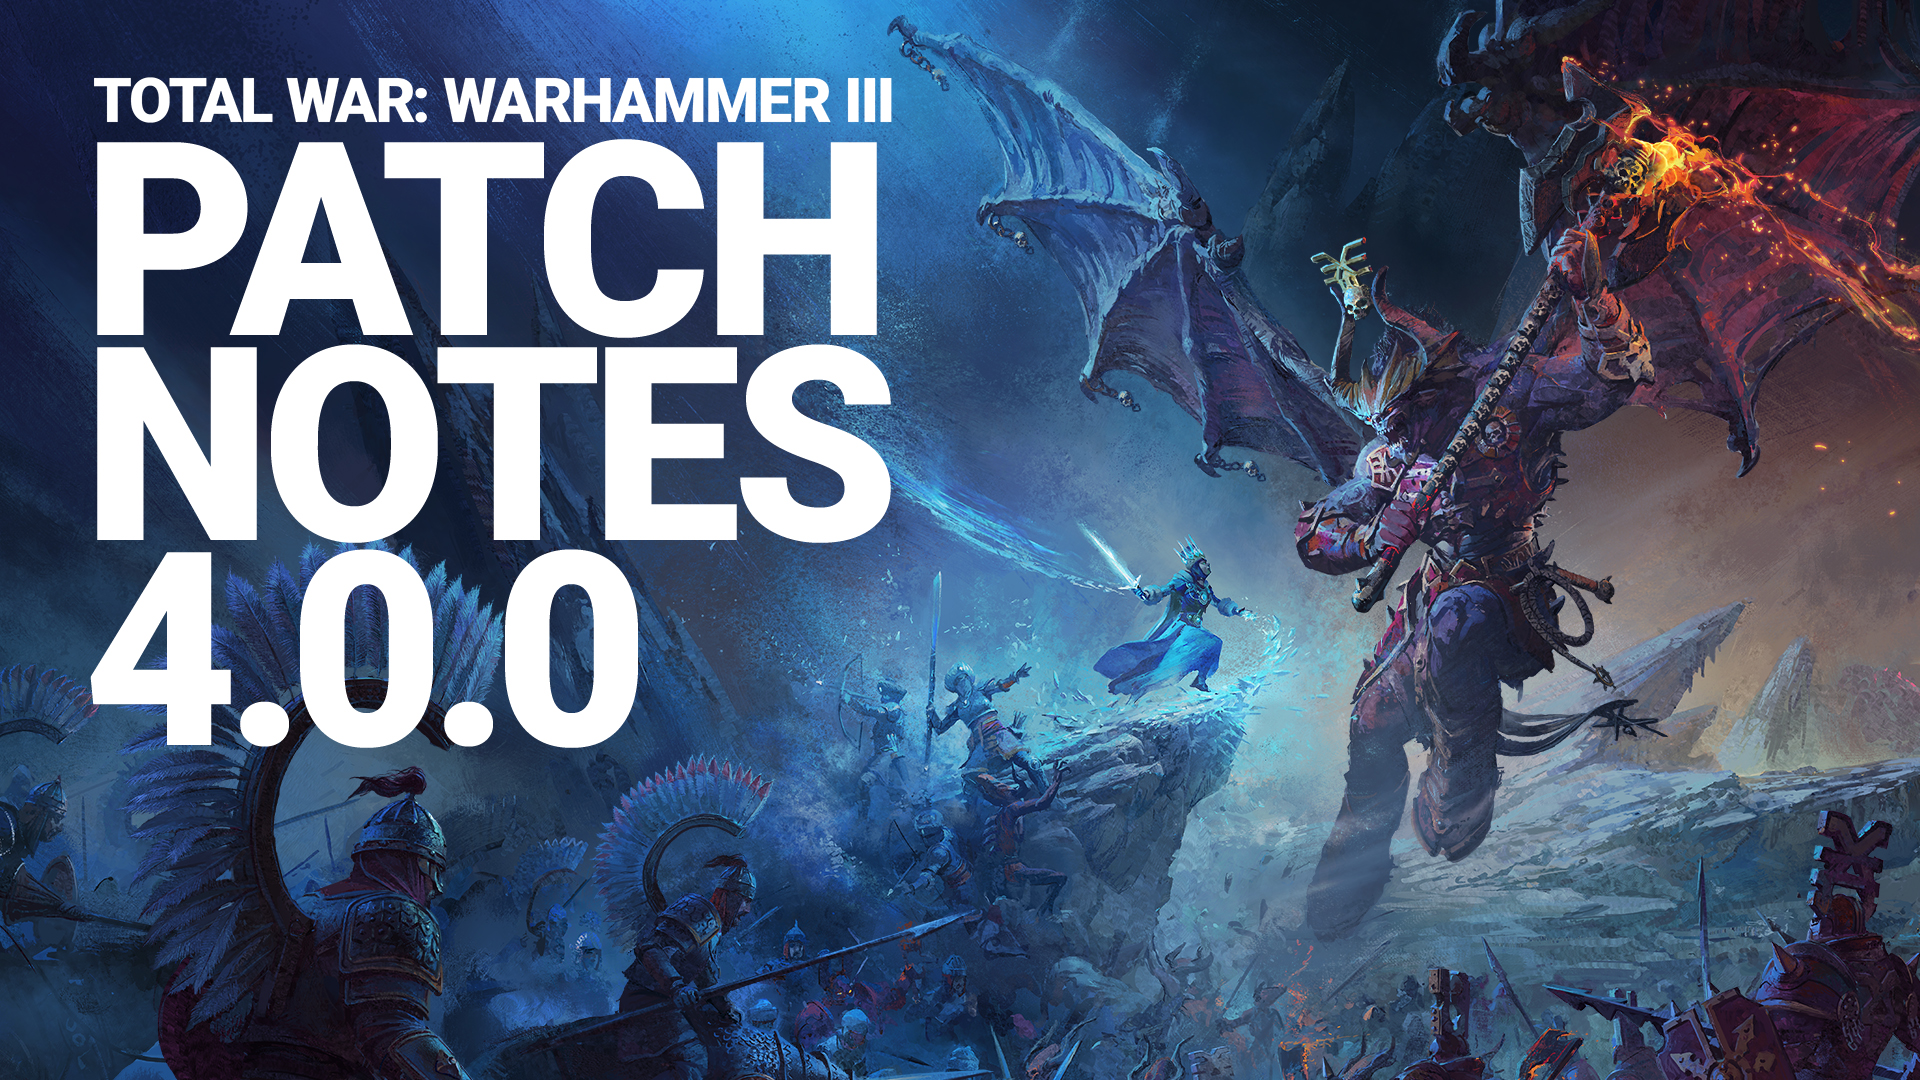 Patch 4.04 is live on all platforms, including